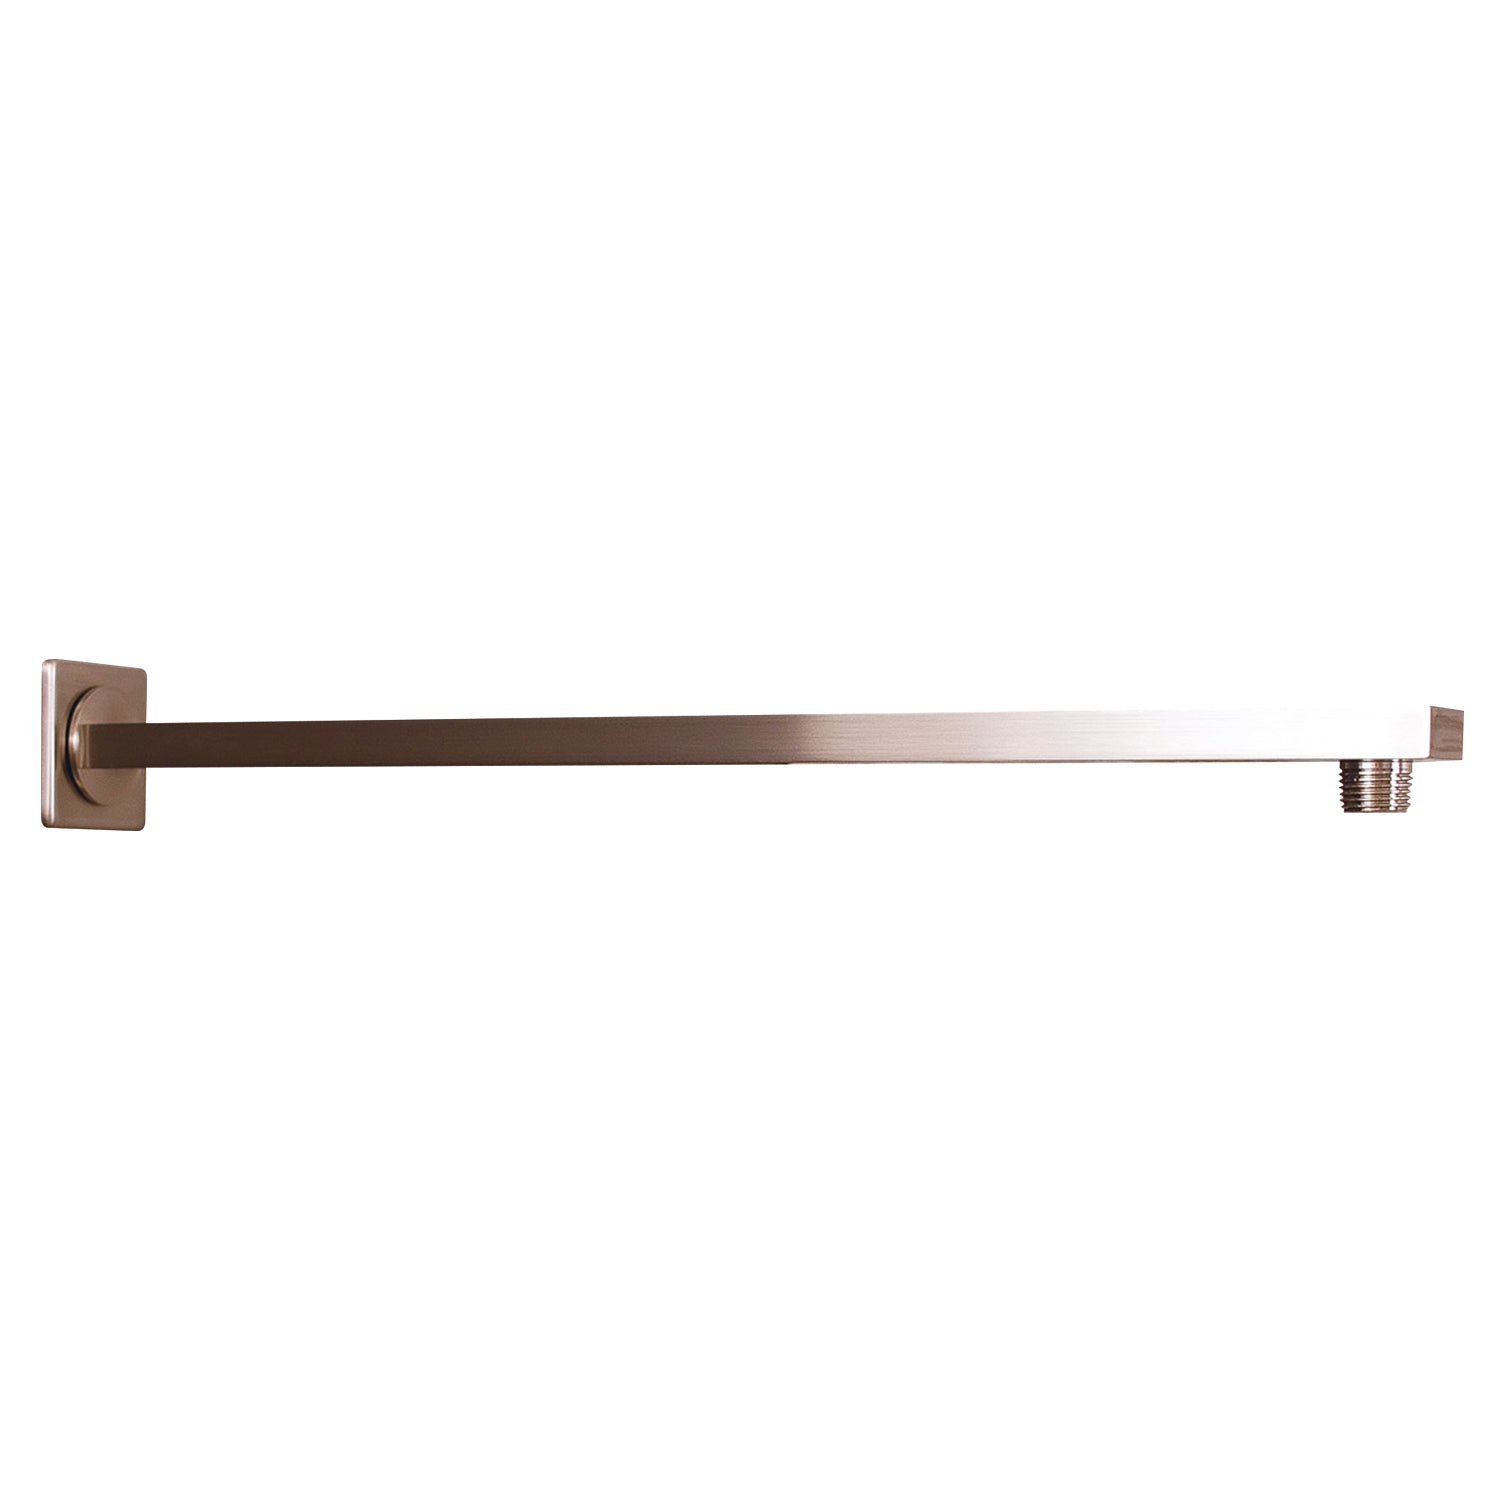 DAX Square Shower Arm, Spout, Brass Body, Wall Mount, Brushed Nickel Finish, 18 Inches (D-F20-18-BN)